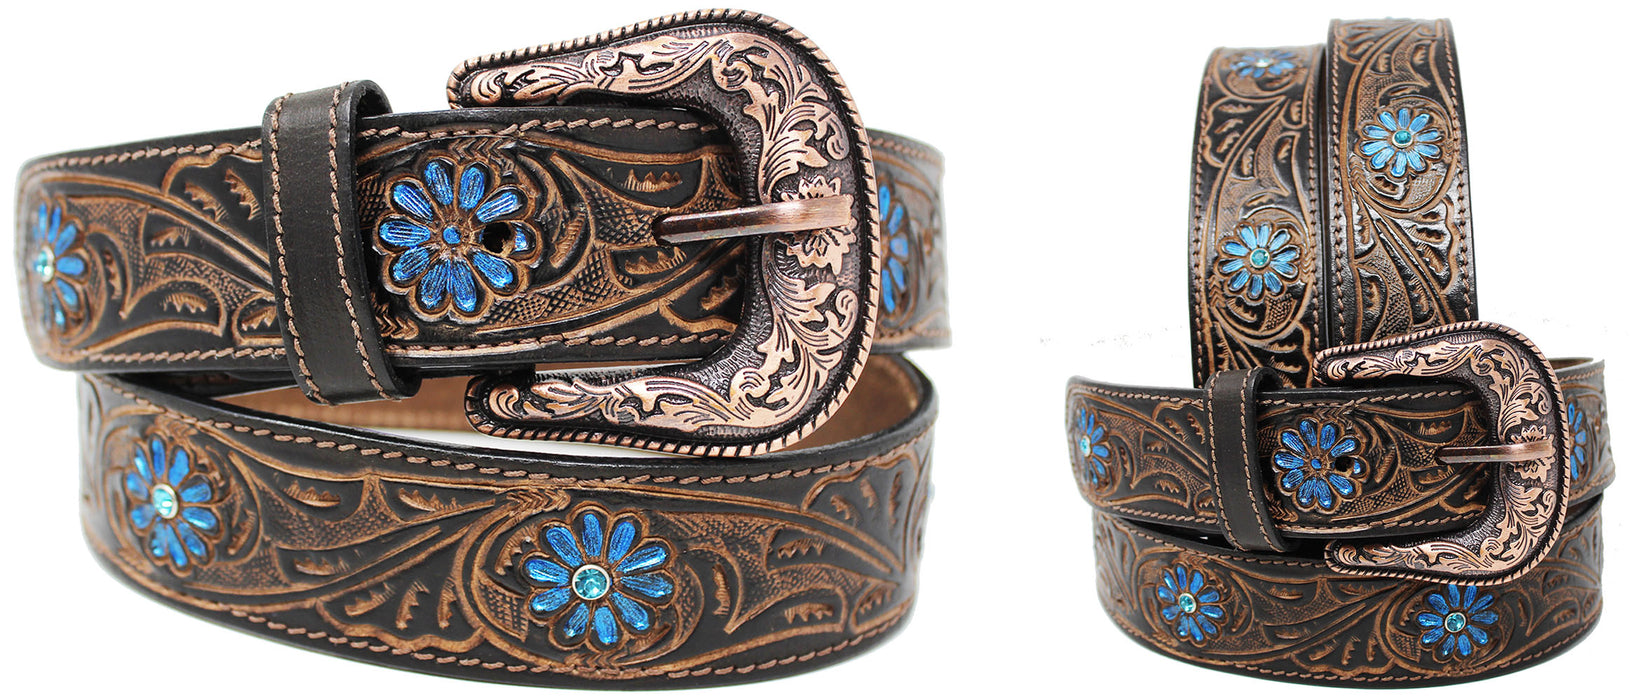 Men's Women Girl 1.5 Wide Leather Floral Tooled Casual Jean Belt Strap 26AA304